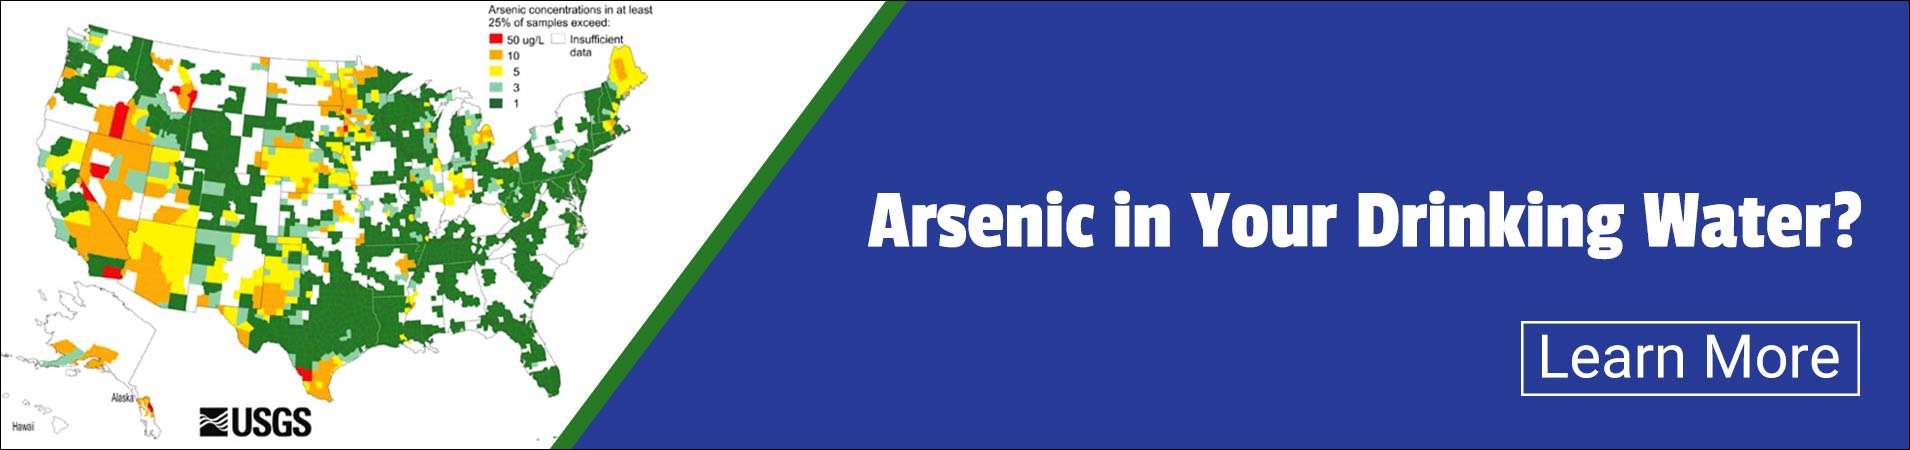 is there arsenic in your drinking water